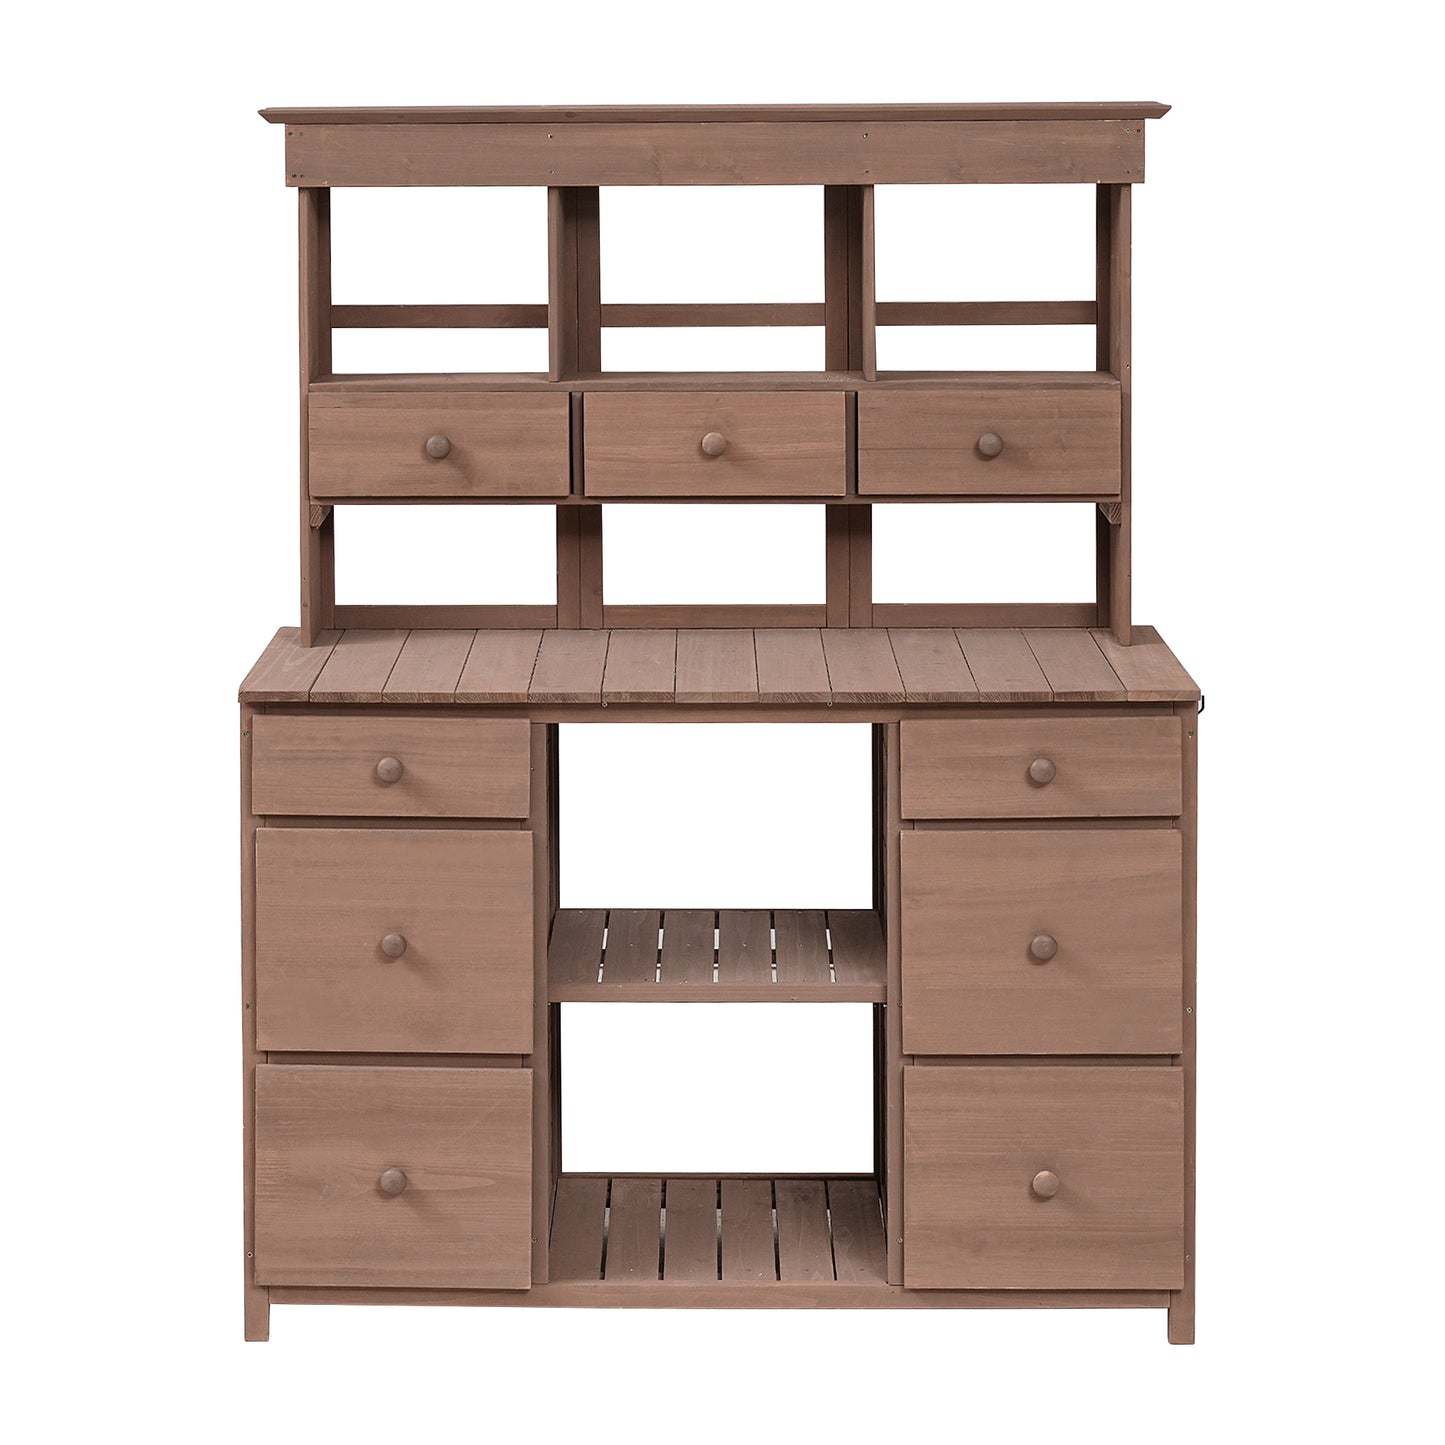 [Video Provided] TOPMAX Garden Potting Bench Table, Rustic and Sleek Design with Multiple Drawers and Shelves for Storage, Brown